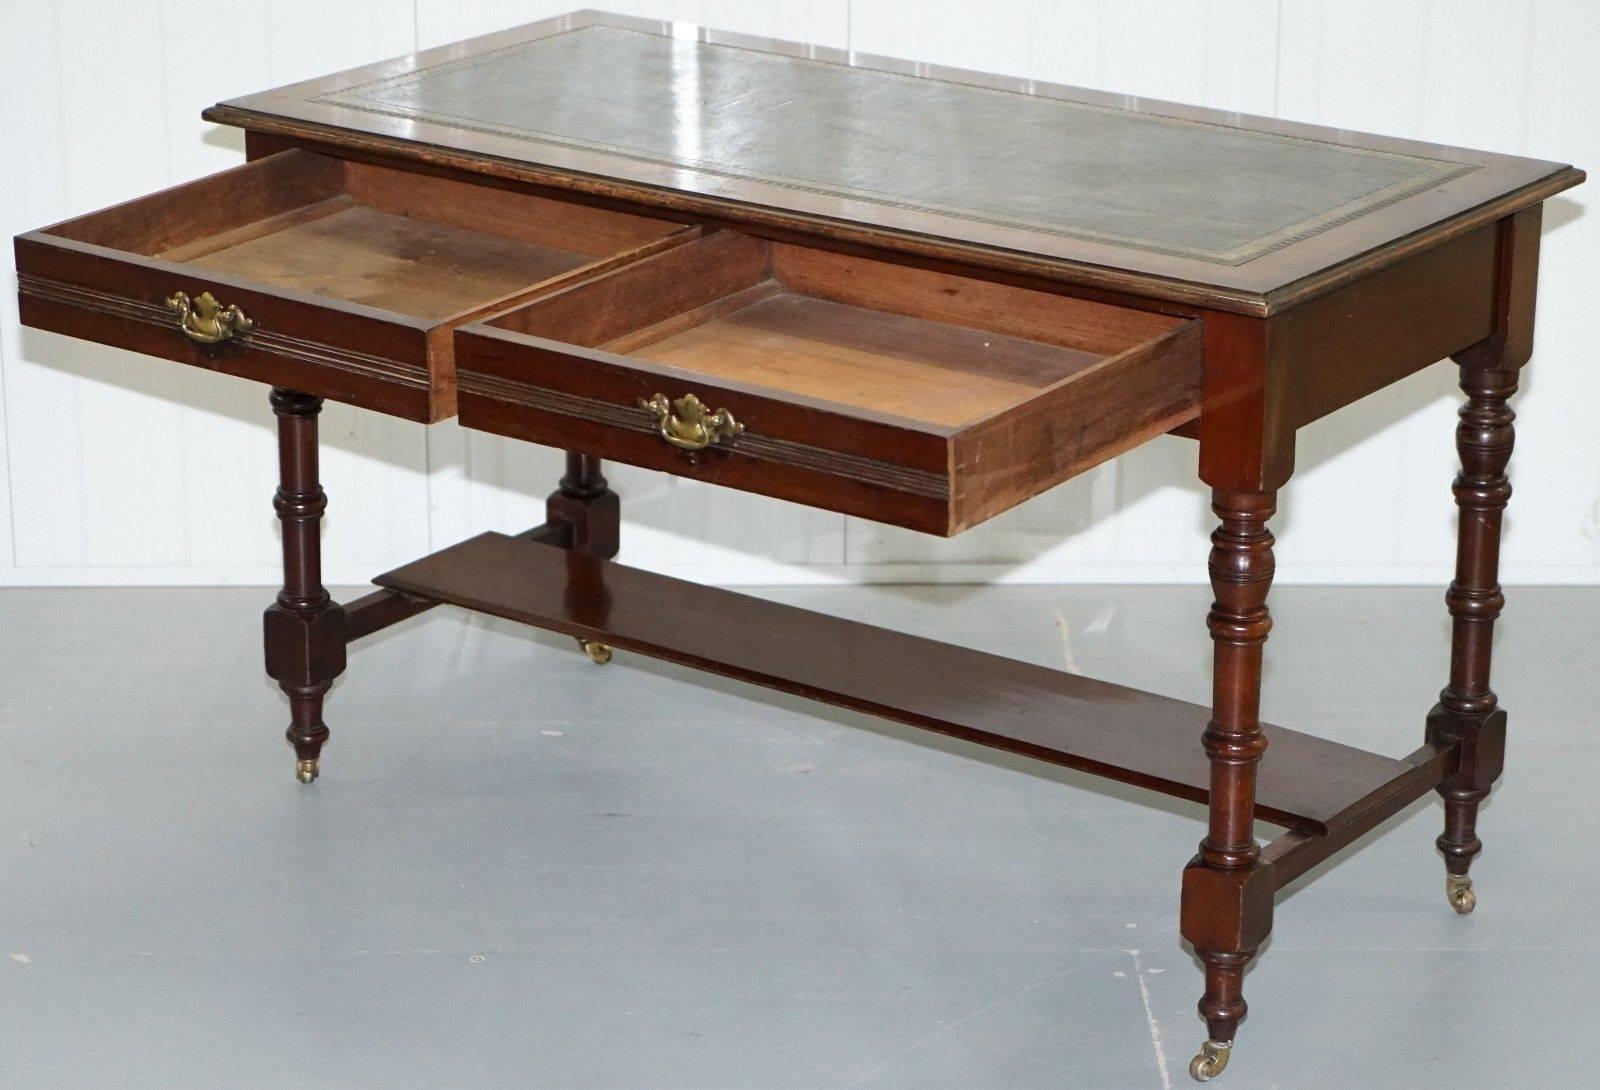 Victorian Mahogany with Leather Writing Surface Desk Writing Table Lovely Piece 1